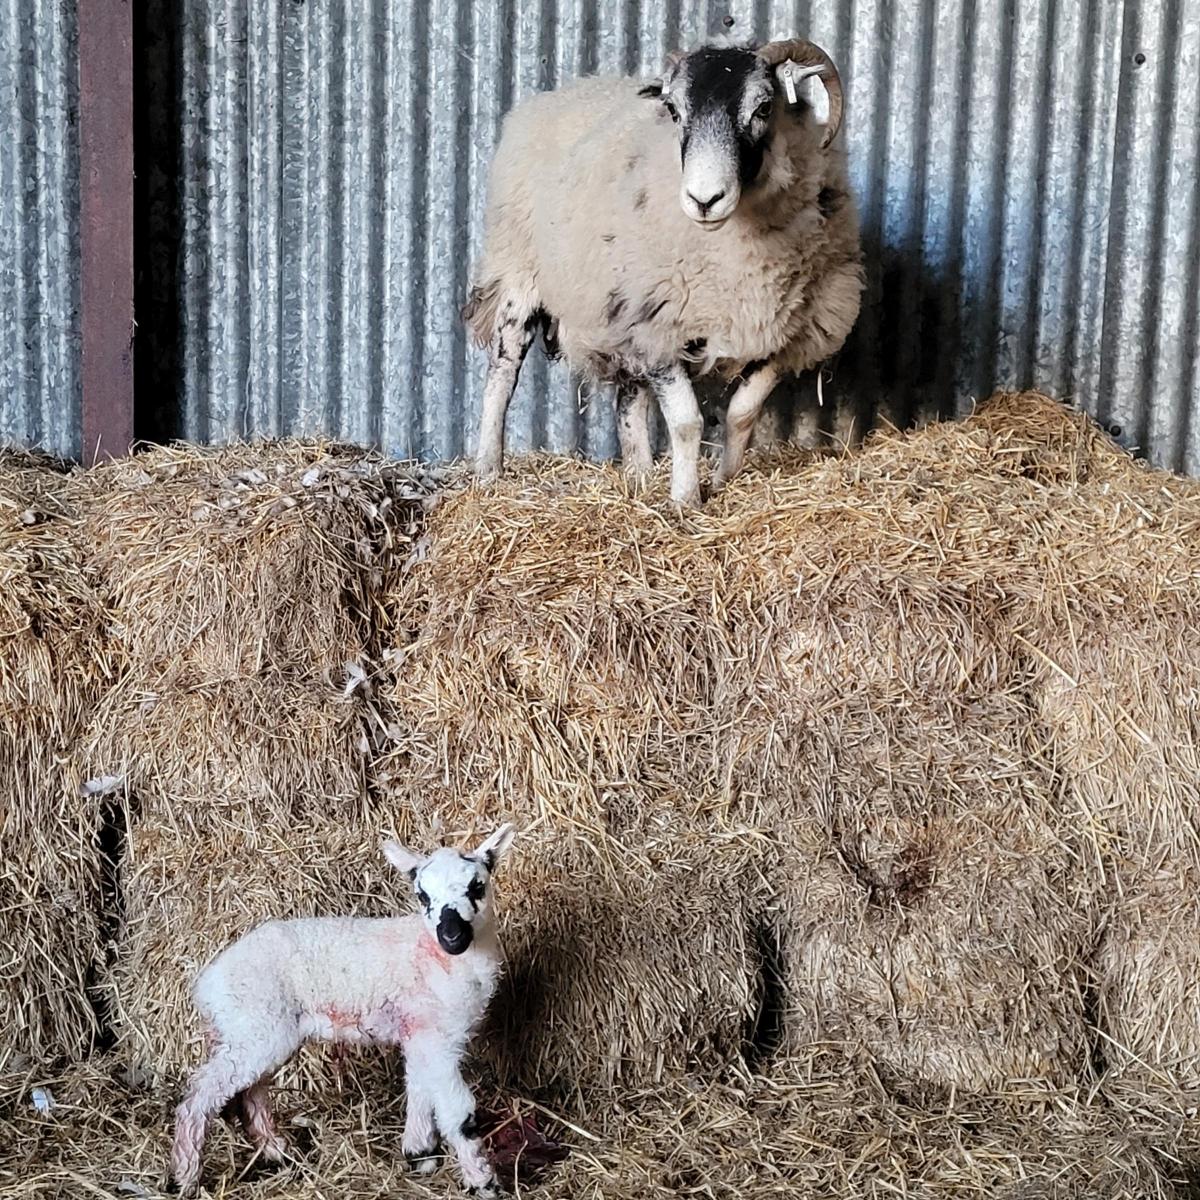 Shona Duncan - Ex Inveruglas BF ewe still preferring the high ground! Only in after requiring assistance lambing. The kerryhill ewe lamb was born backwards